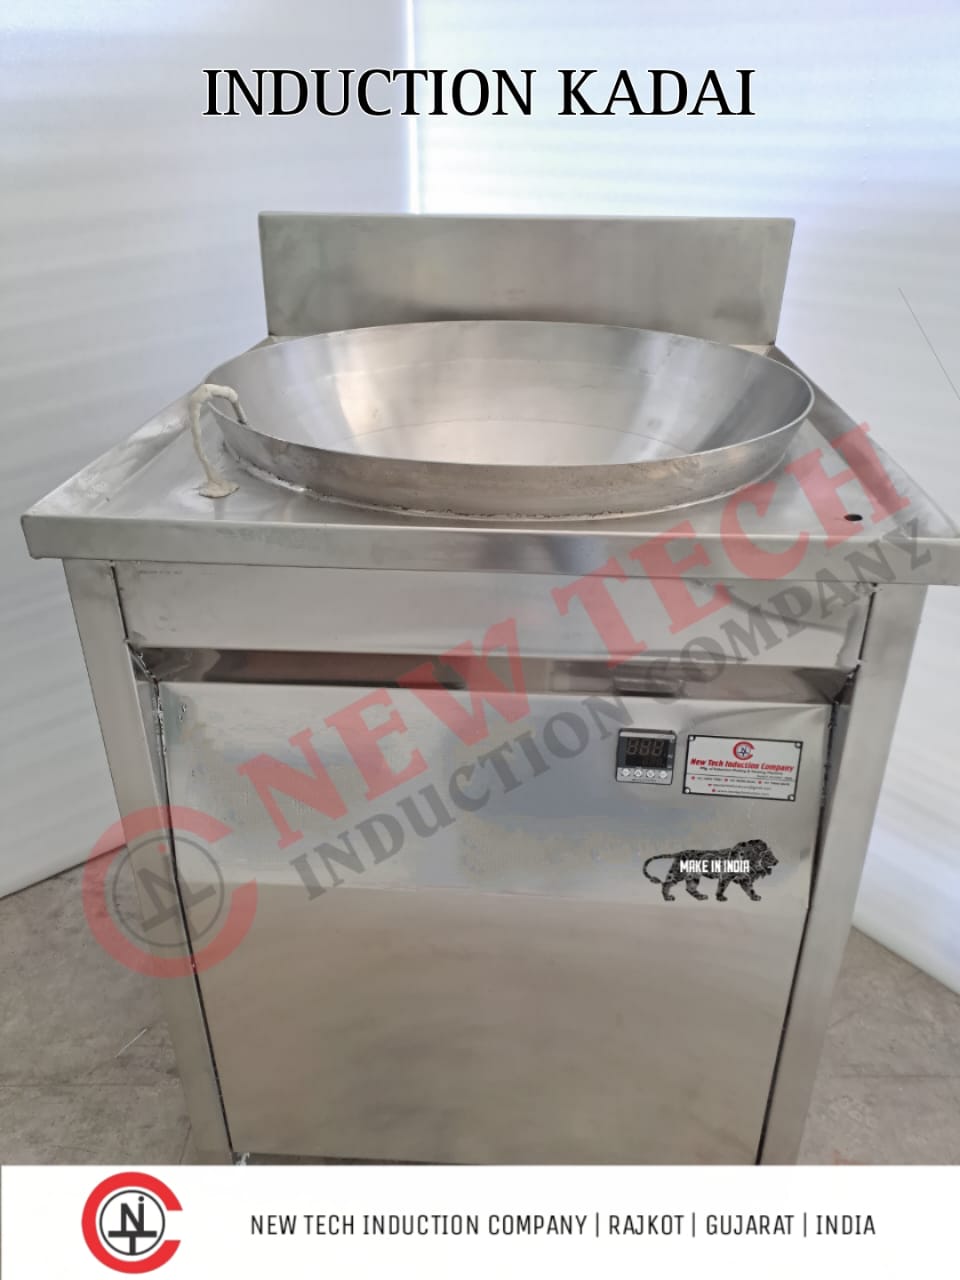 Commercial Induction Kadai Fryer Manufacturers In Chandigarh